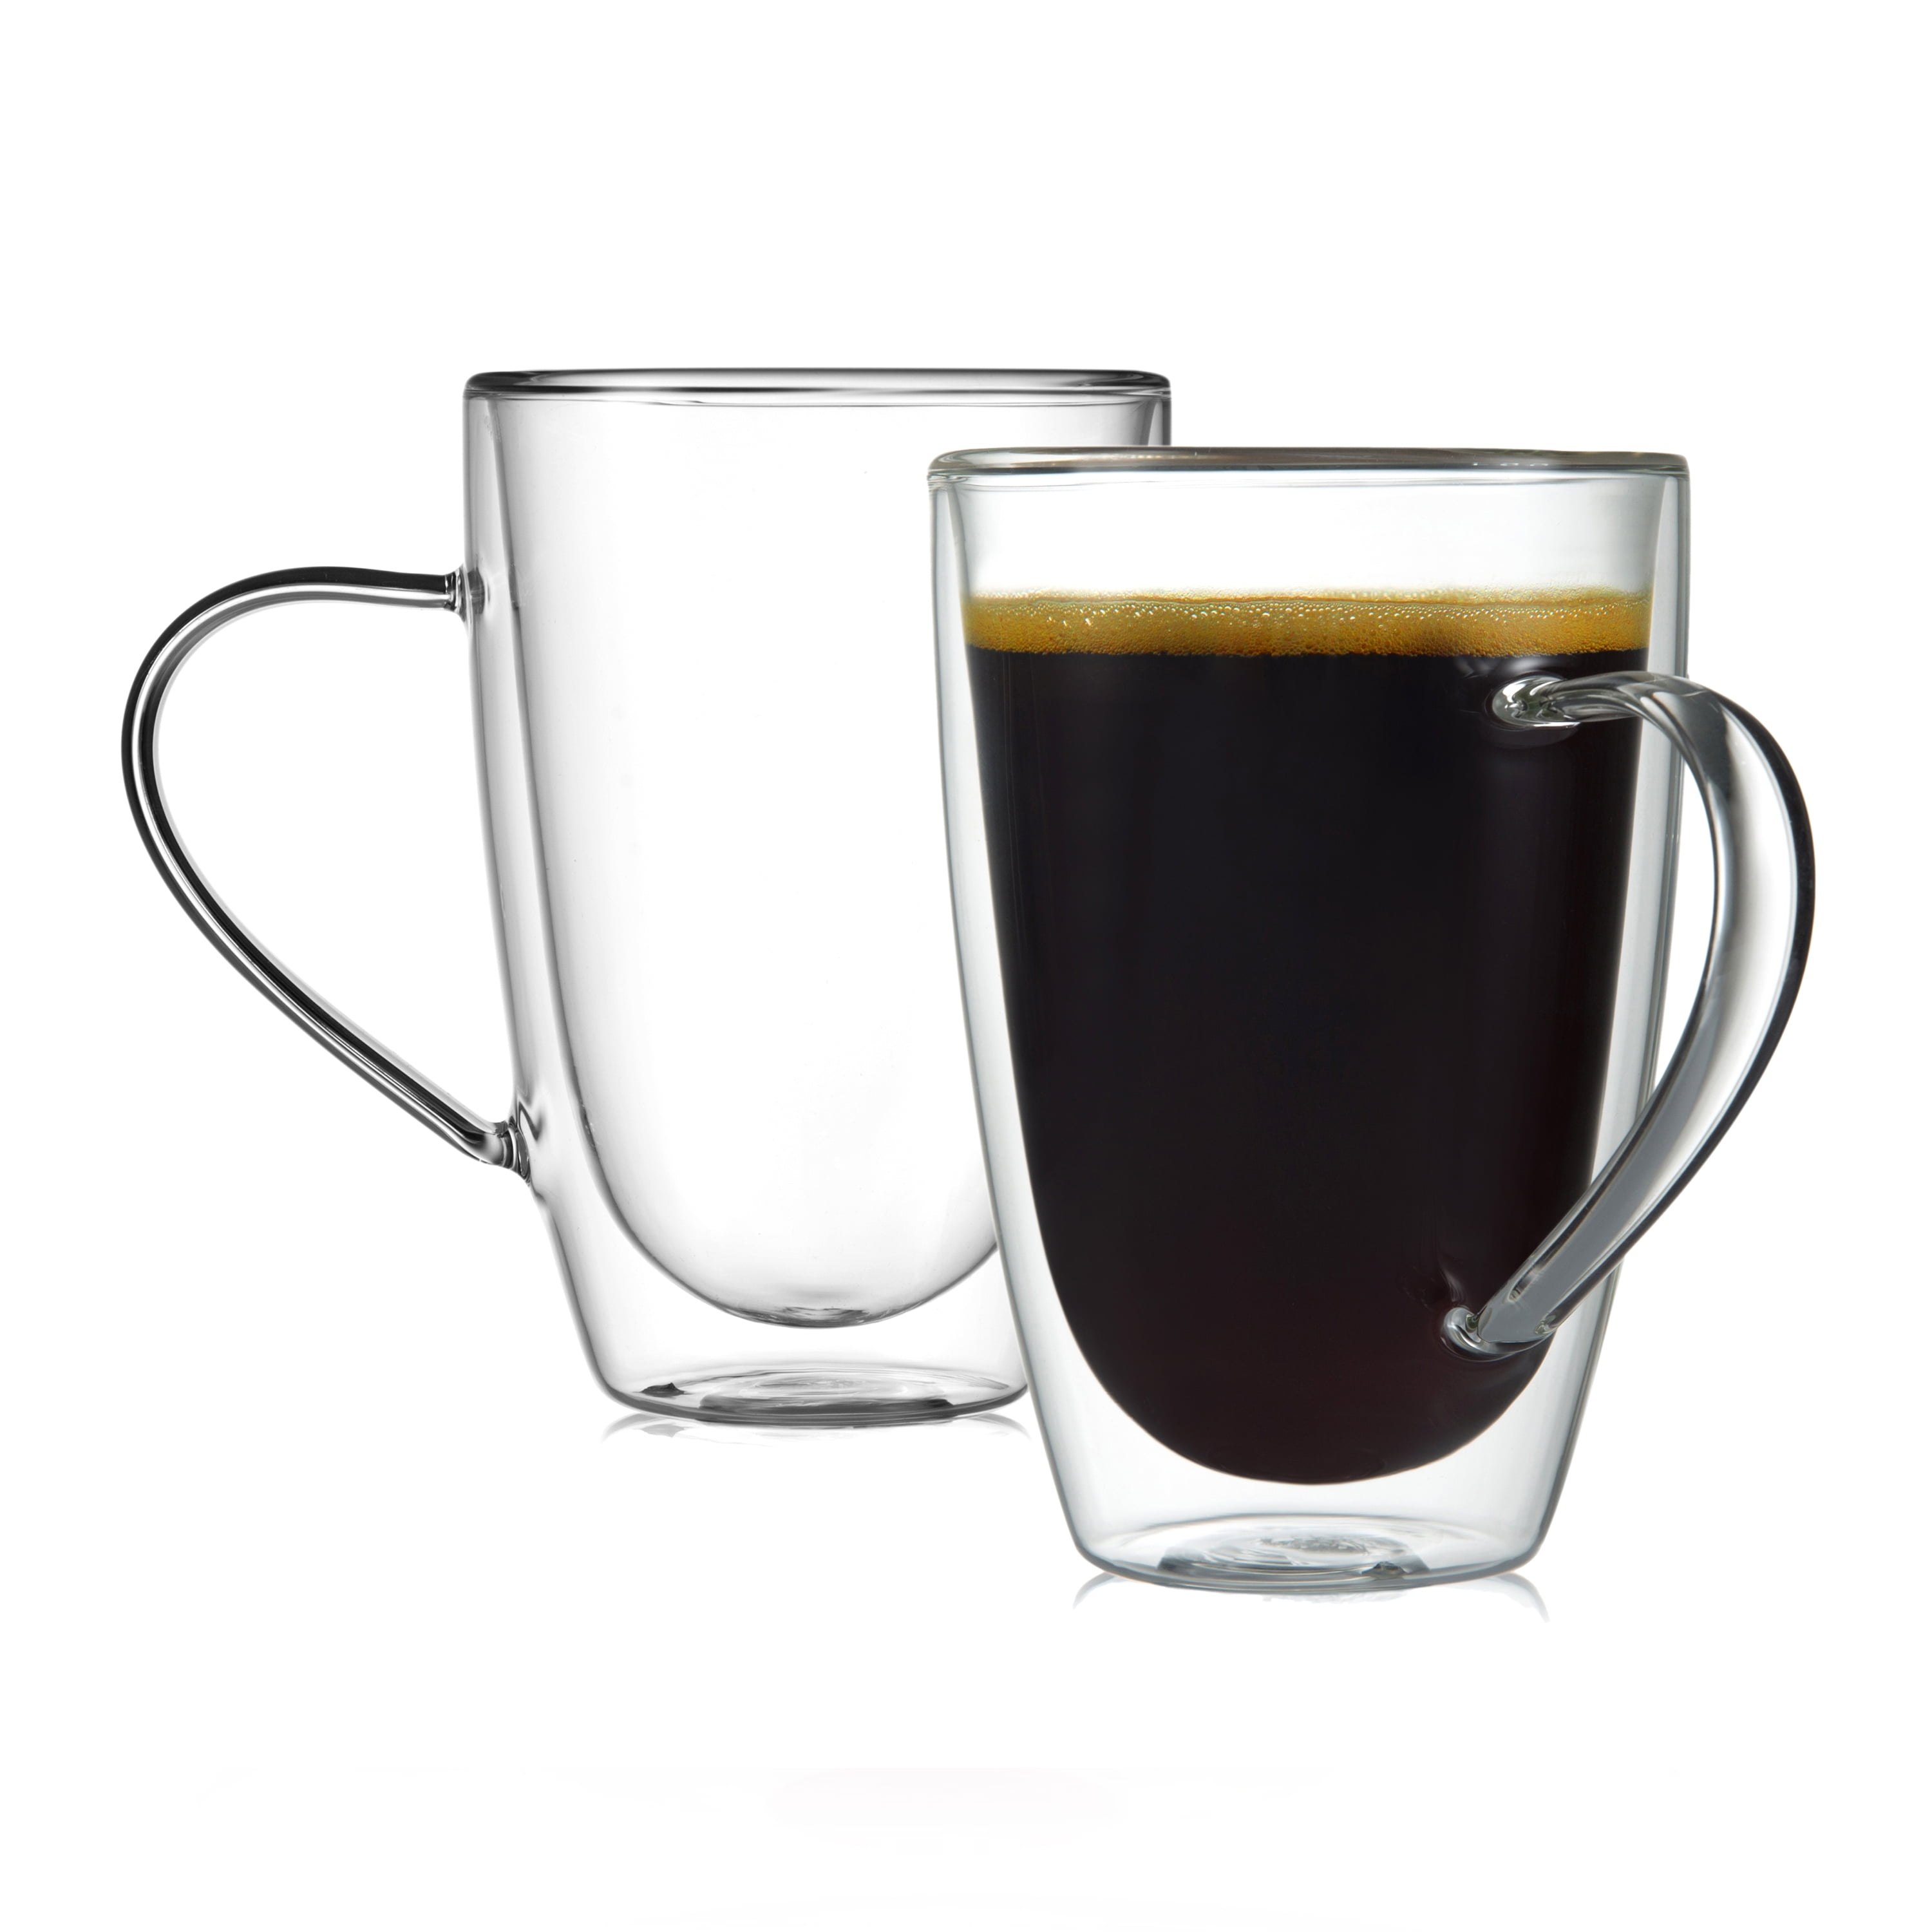 glastal Double Walled Glass Coffee Mug 12 oz Cappuccino Cups Set of 2,  Clear Glass Coffee Cups with …See more glastal Double Walled Glass Coffee  Mug